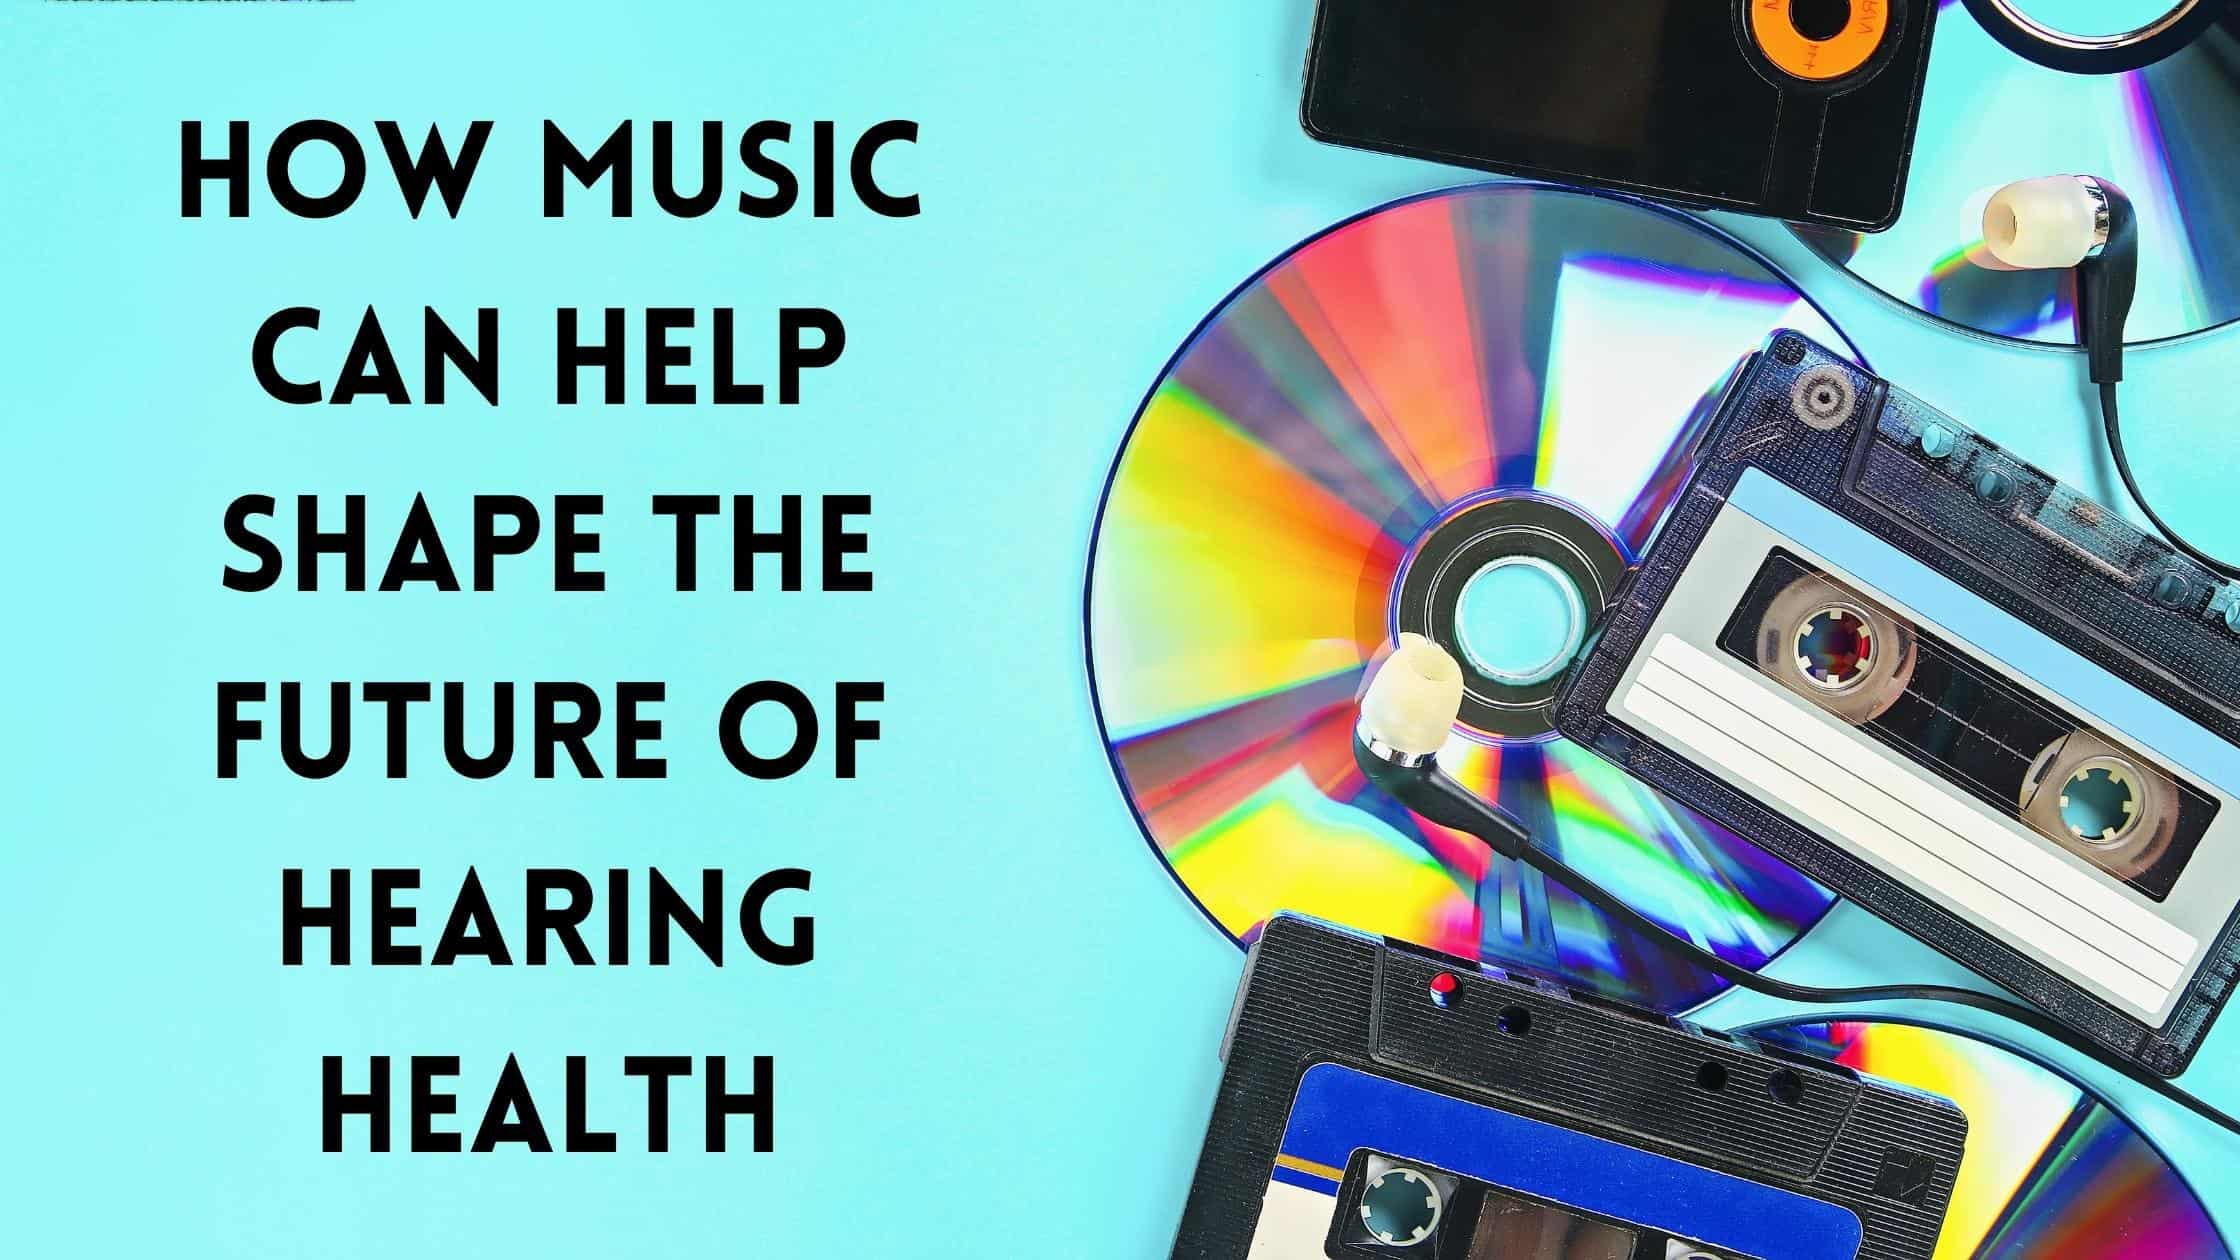 Featured image for “How Music Can Help Shape the Future of Hearing Health”